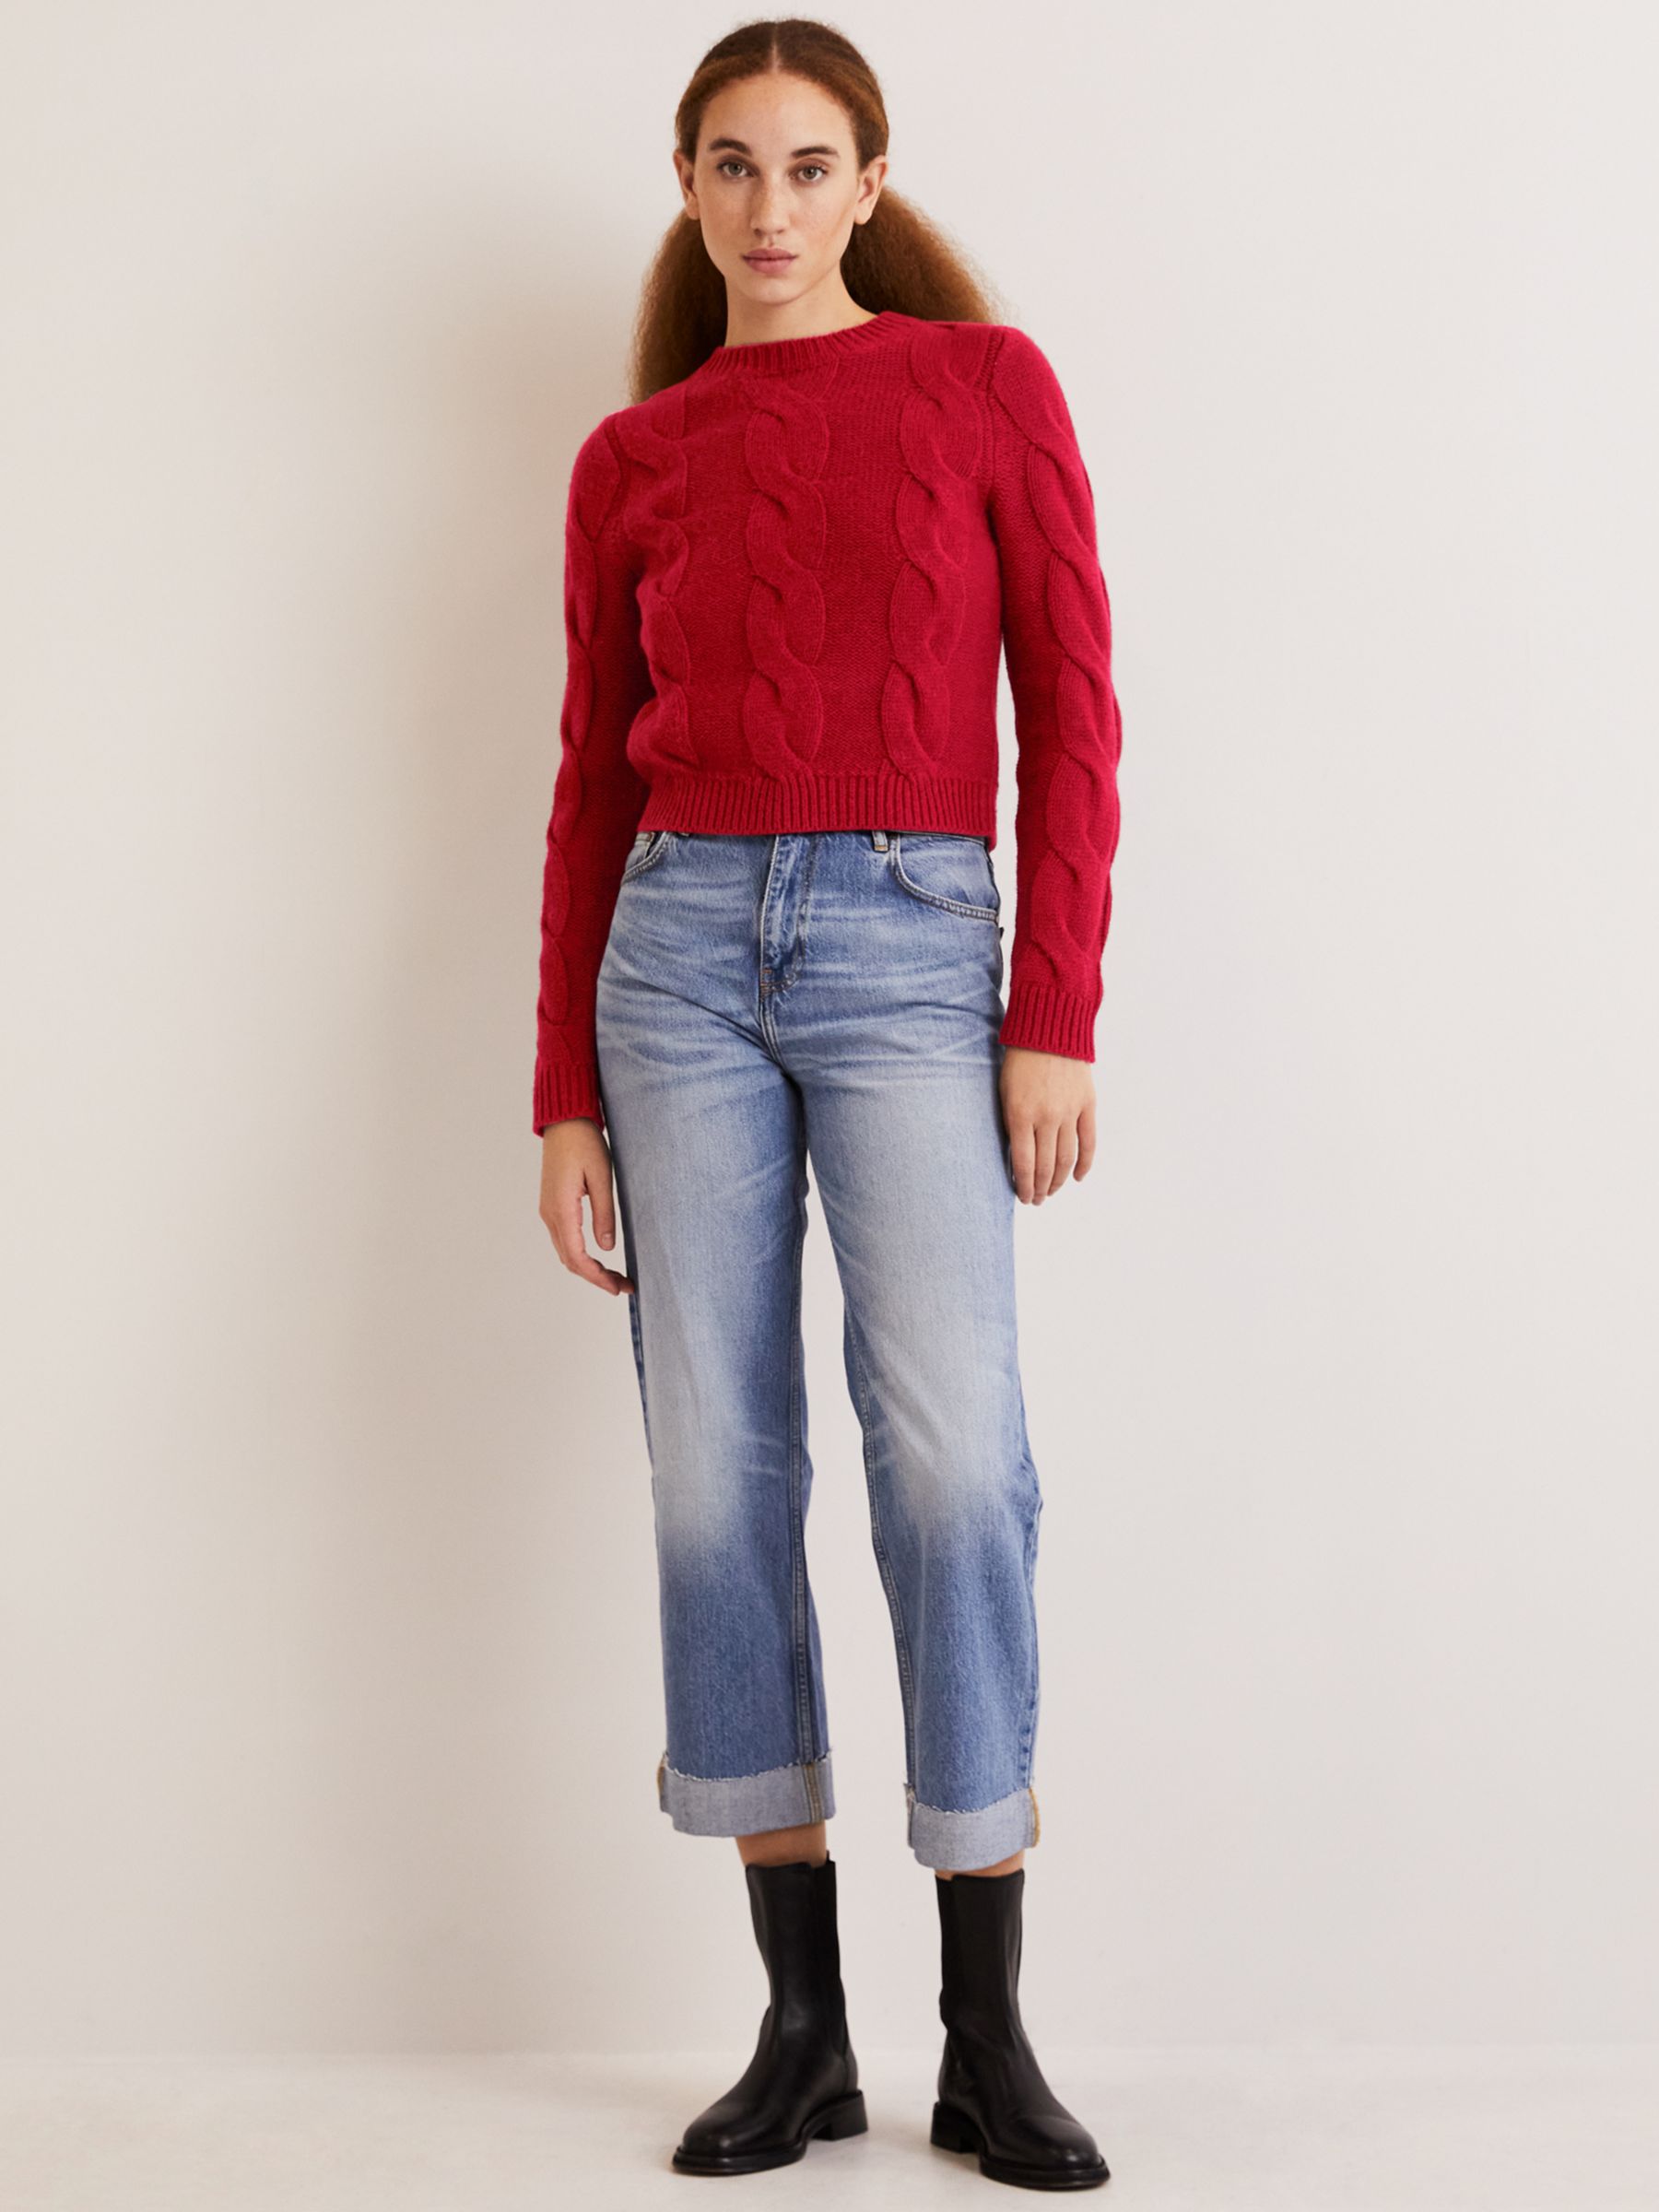 Boden Chunky Cable Knit Wool Blend Jumper